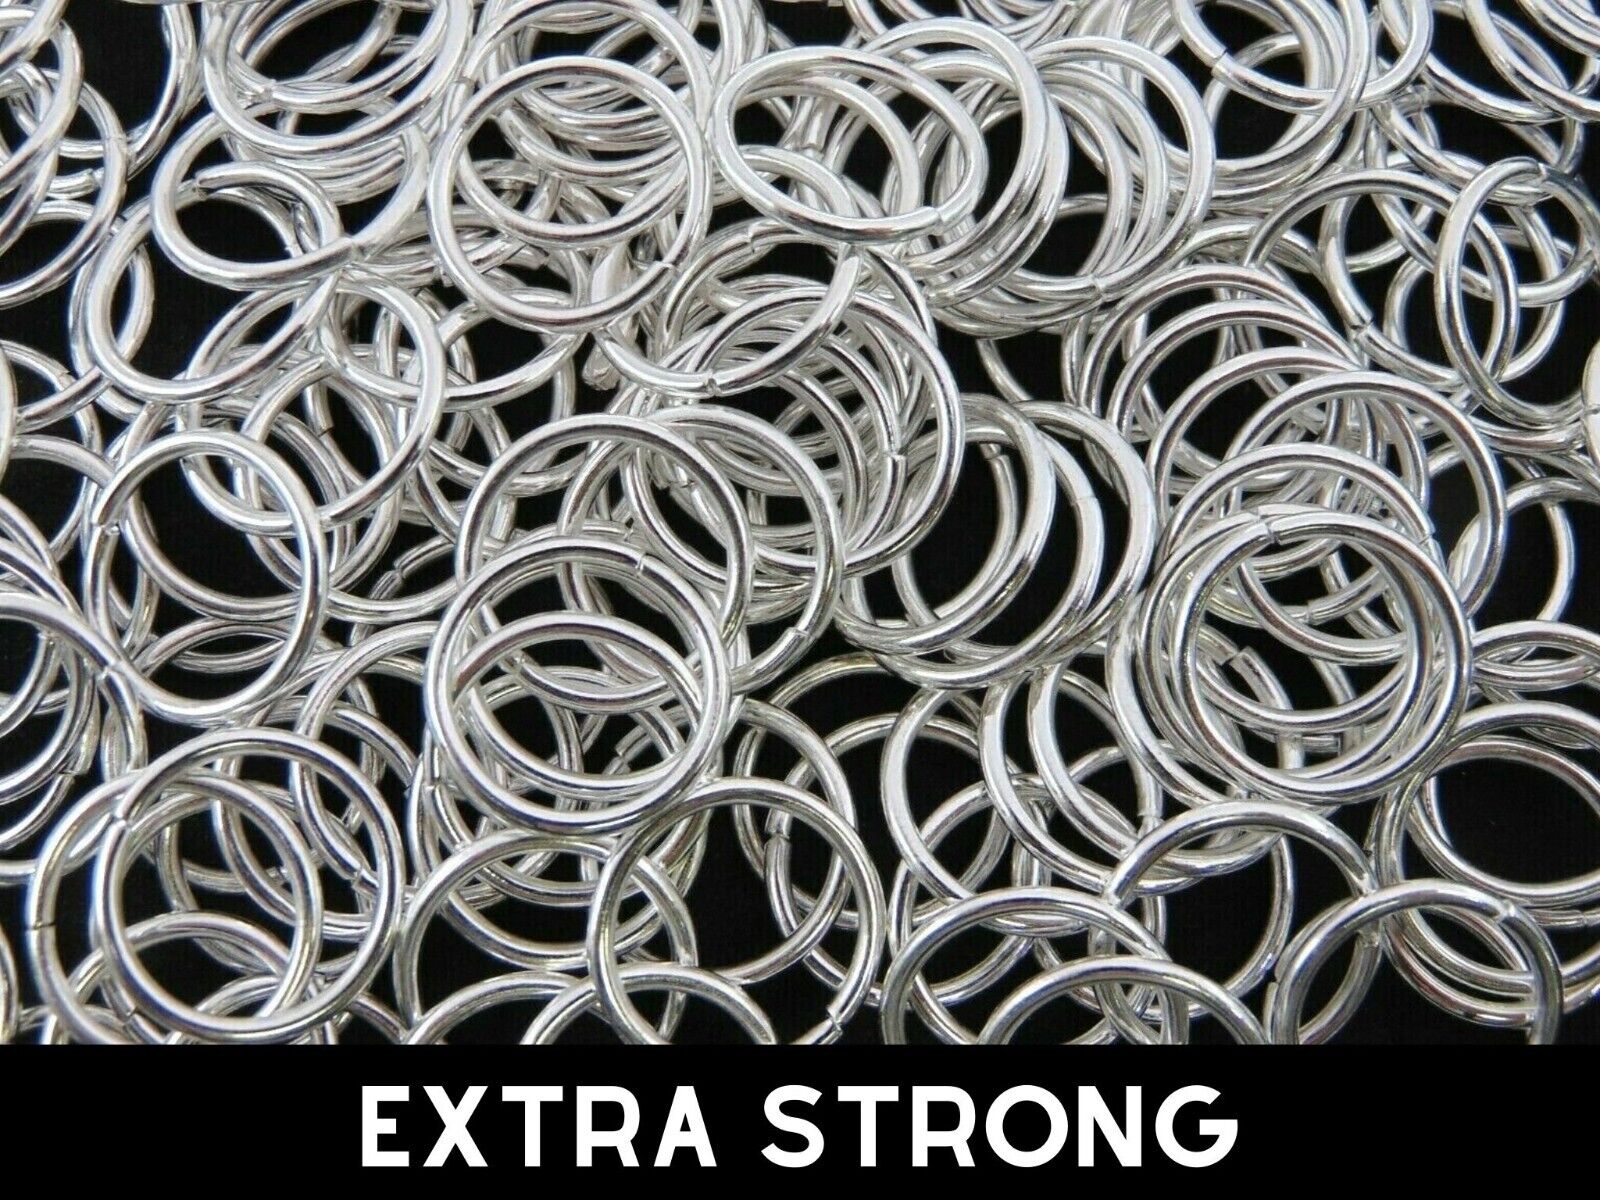 Silver 50 Pcs EXTRA LARGE STRONG JUMP RINGS Silver Plated 10mm 12mm 14mm 16mm 18mm 